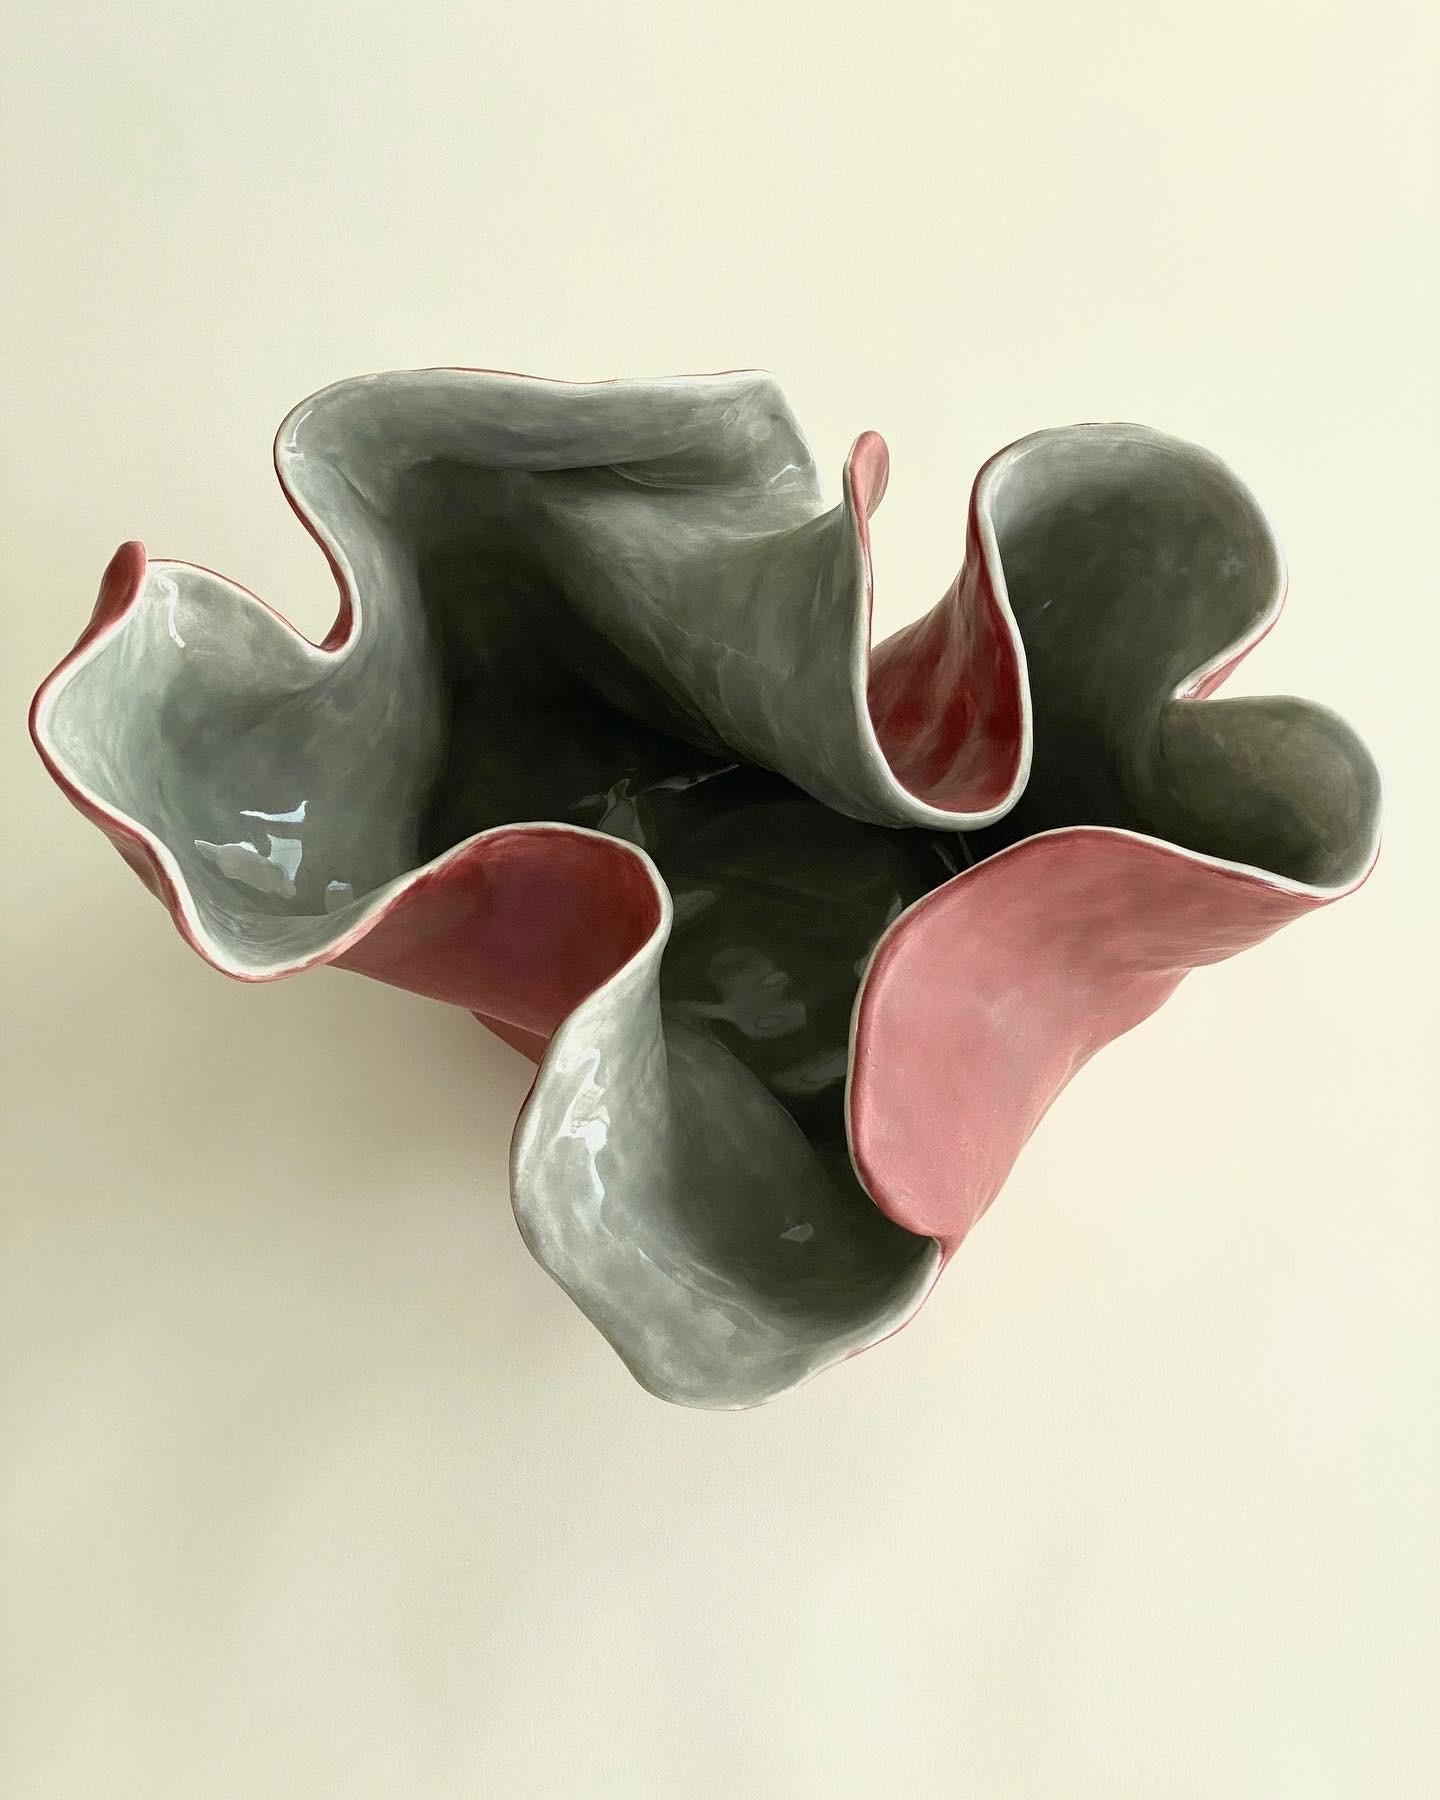 Visceral Red Gray II, Clay Sculpture with Glass Glaze - Brown Abstract Sculpture by Magda Von Hanau